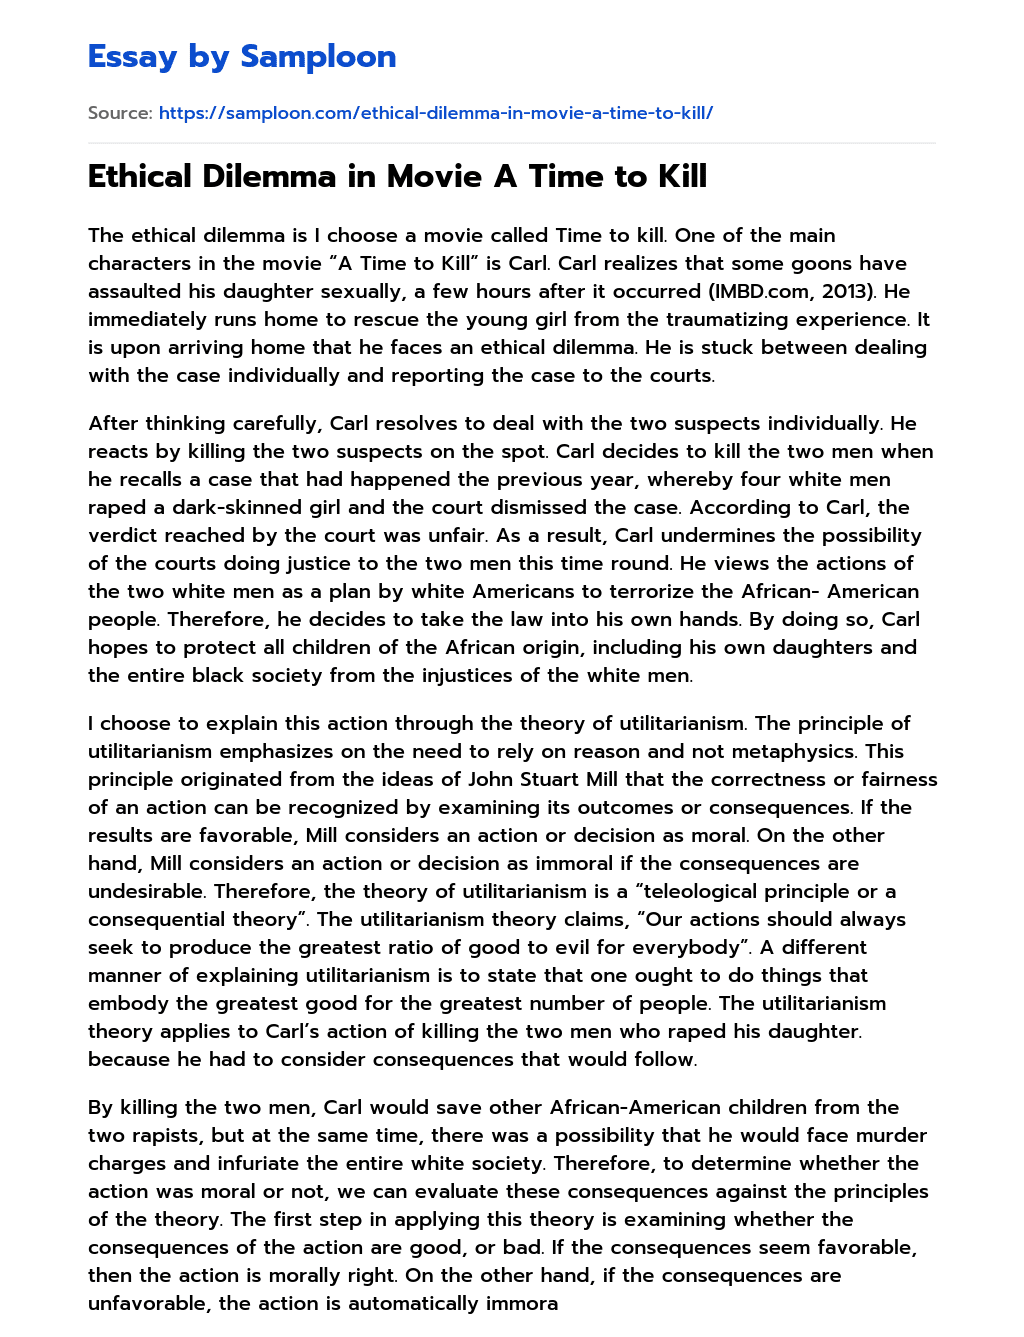 Ethical Dilemma in Movie A Time to Kill essay